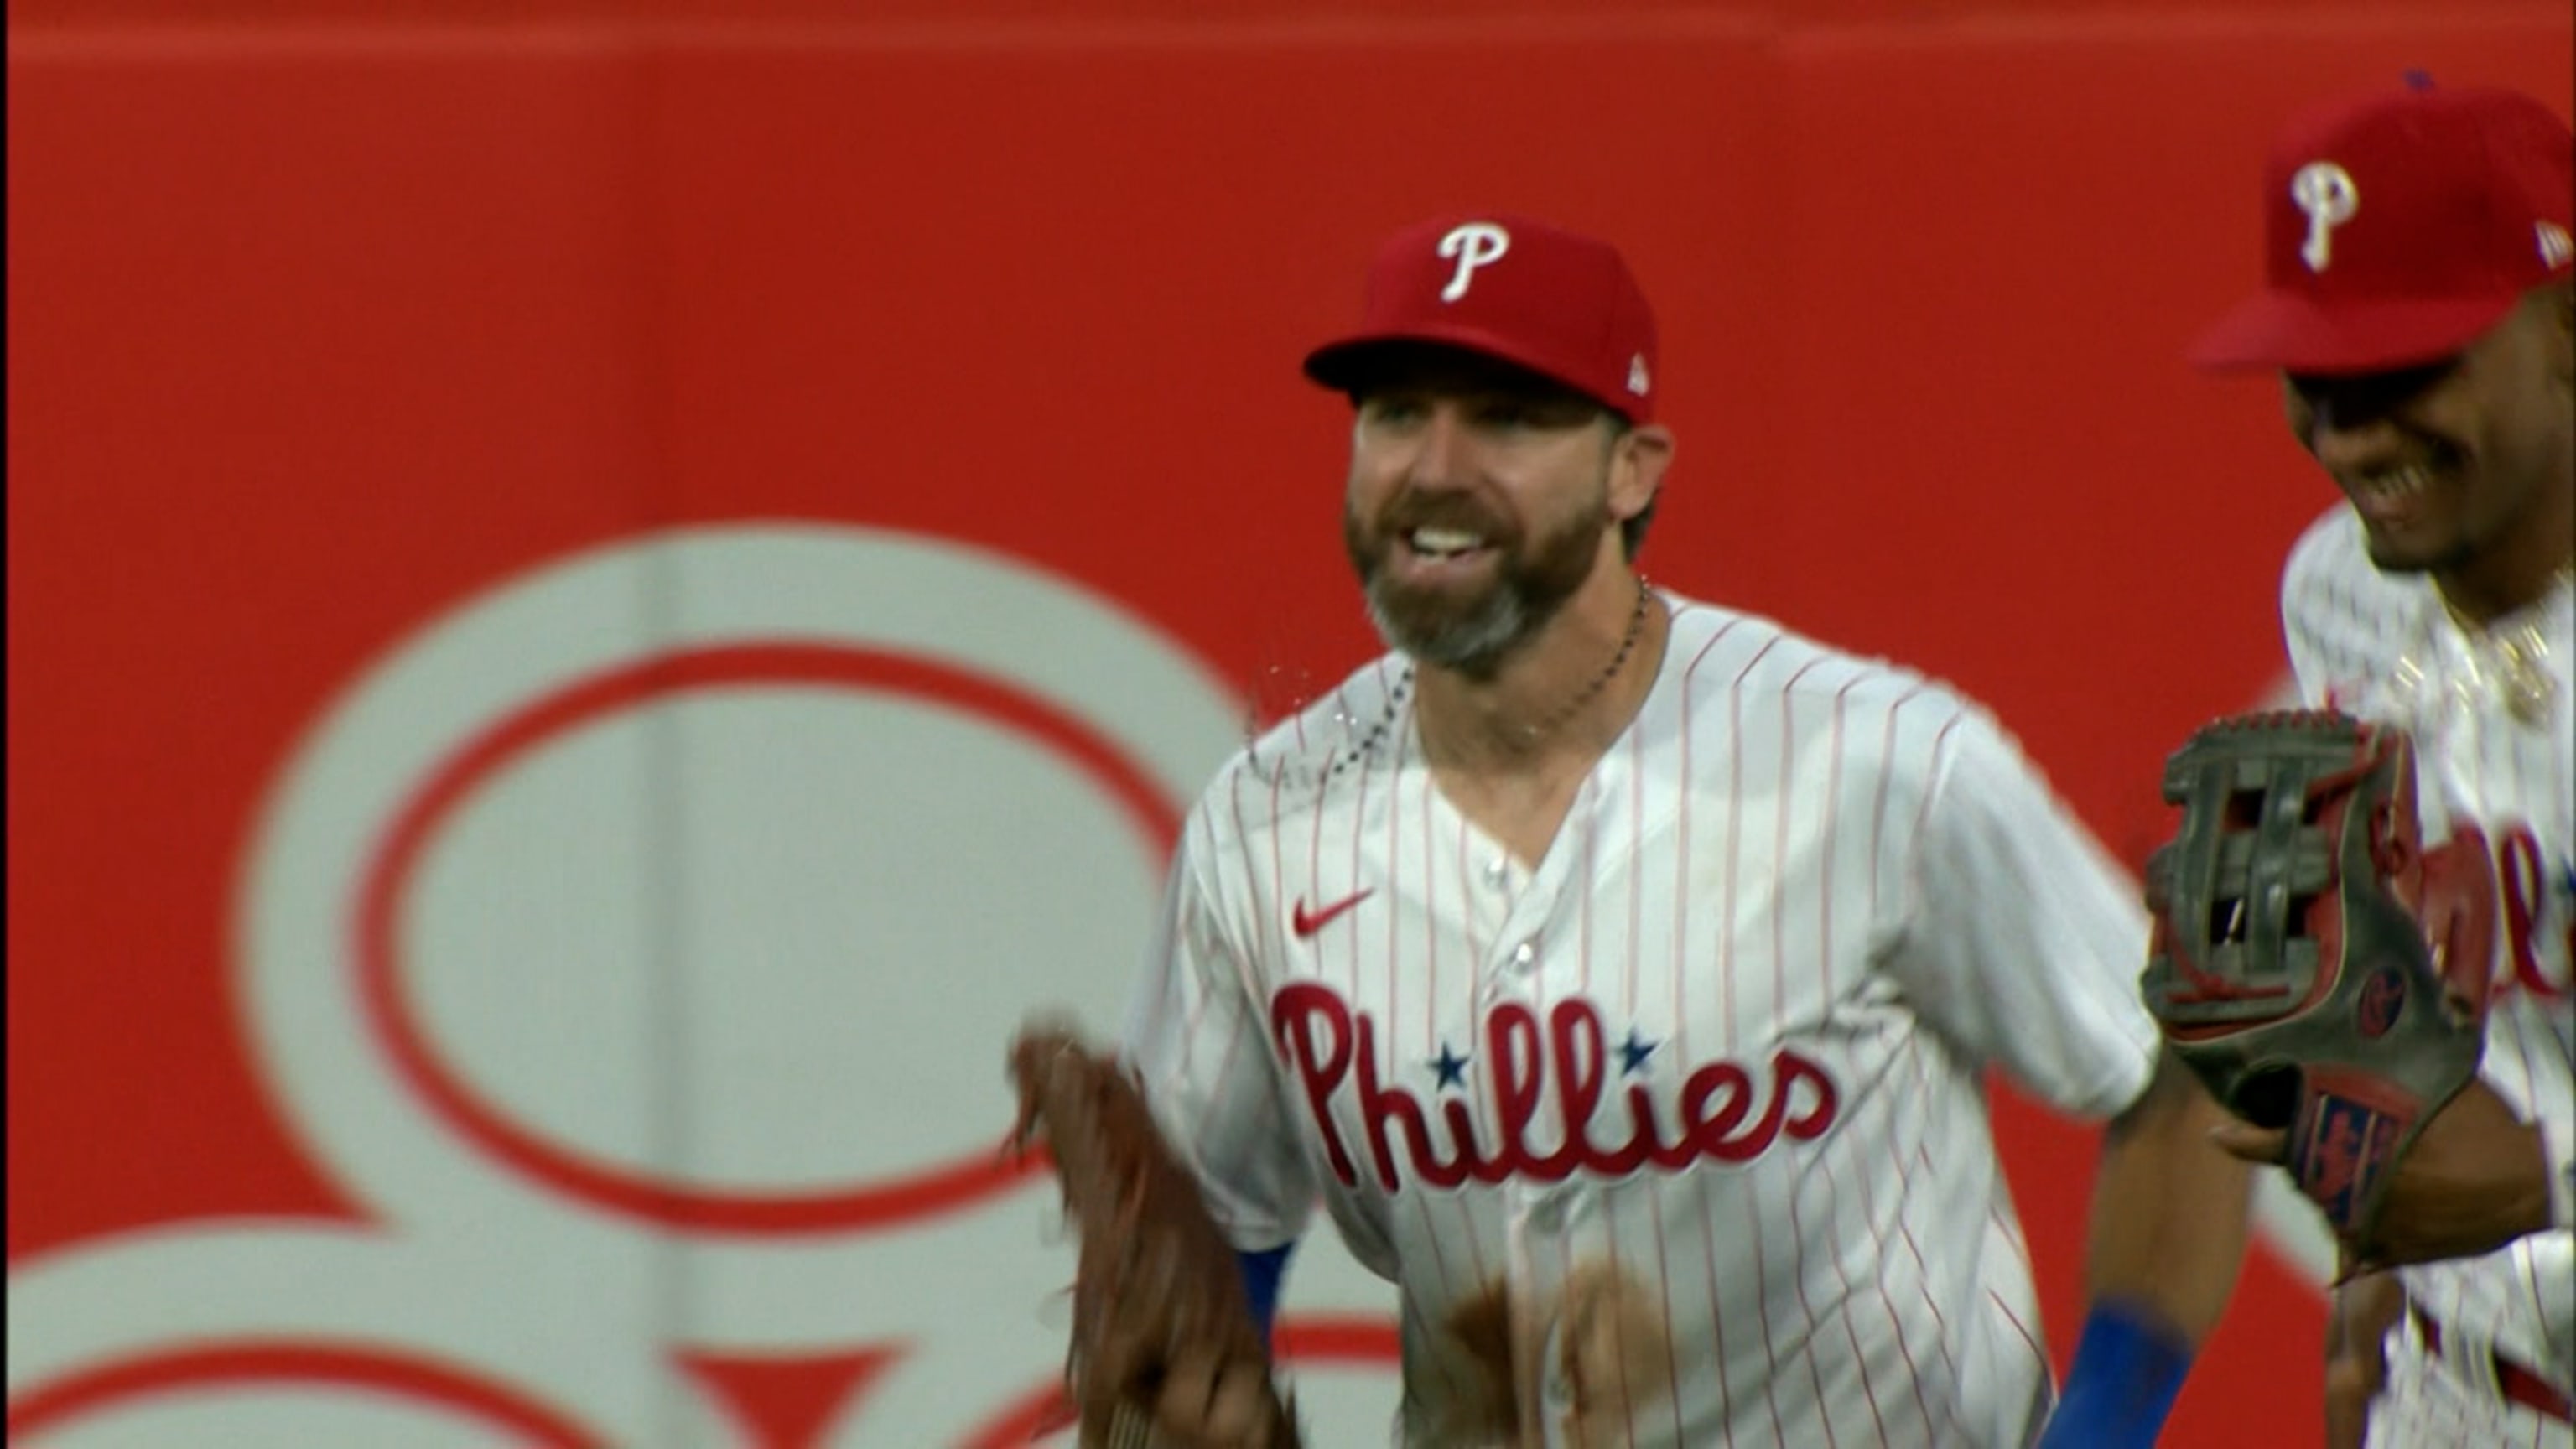 Phillies win the pennant! The Phillies incredible run continues